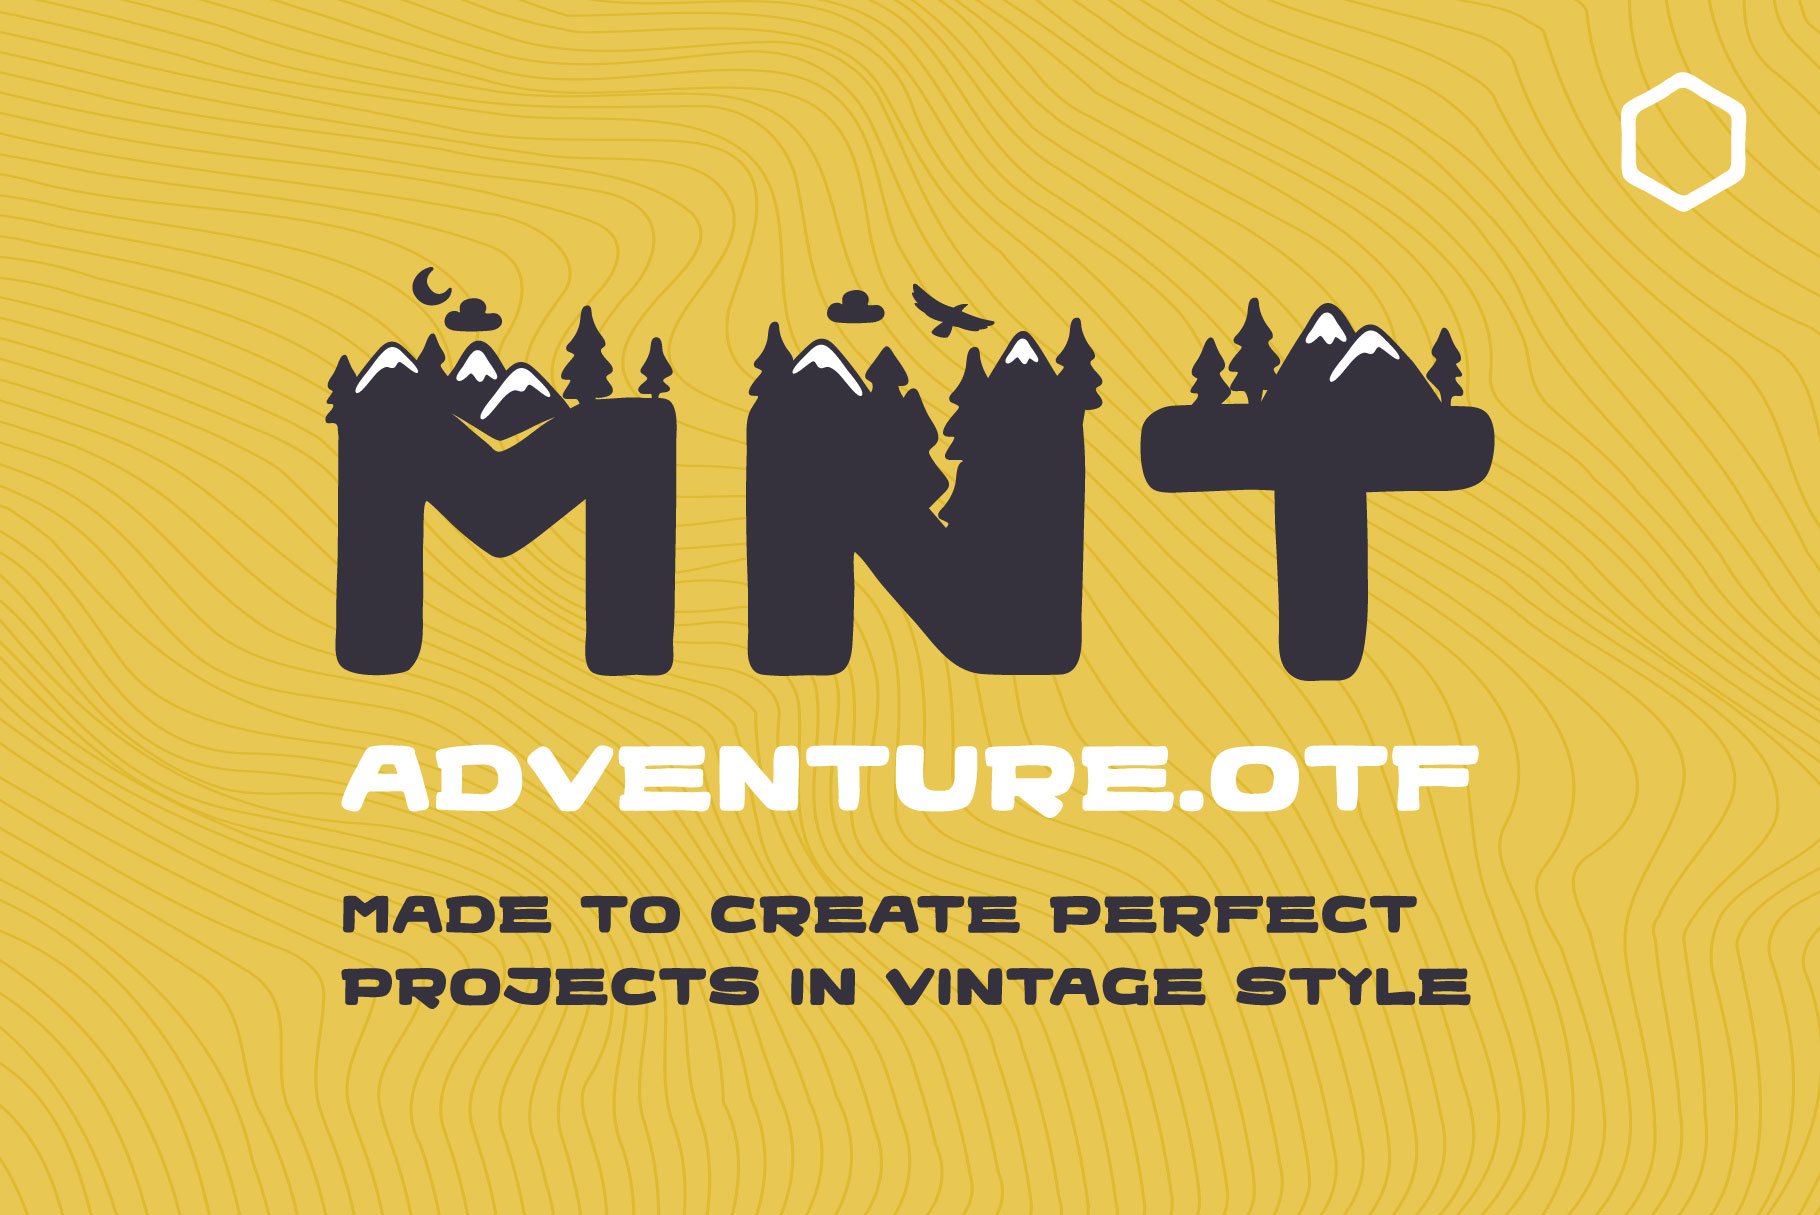 Mnt Adventure display font cover image.